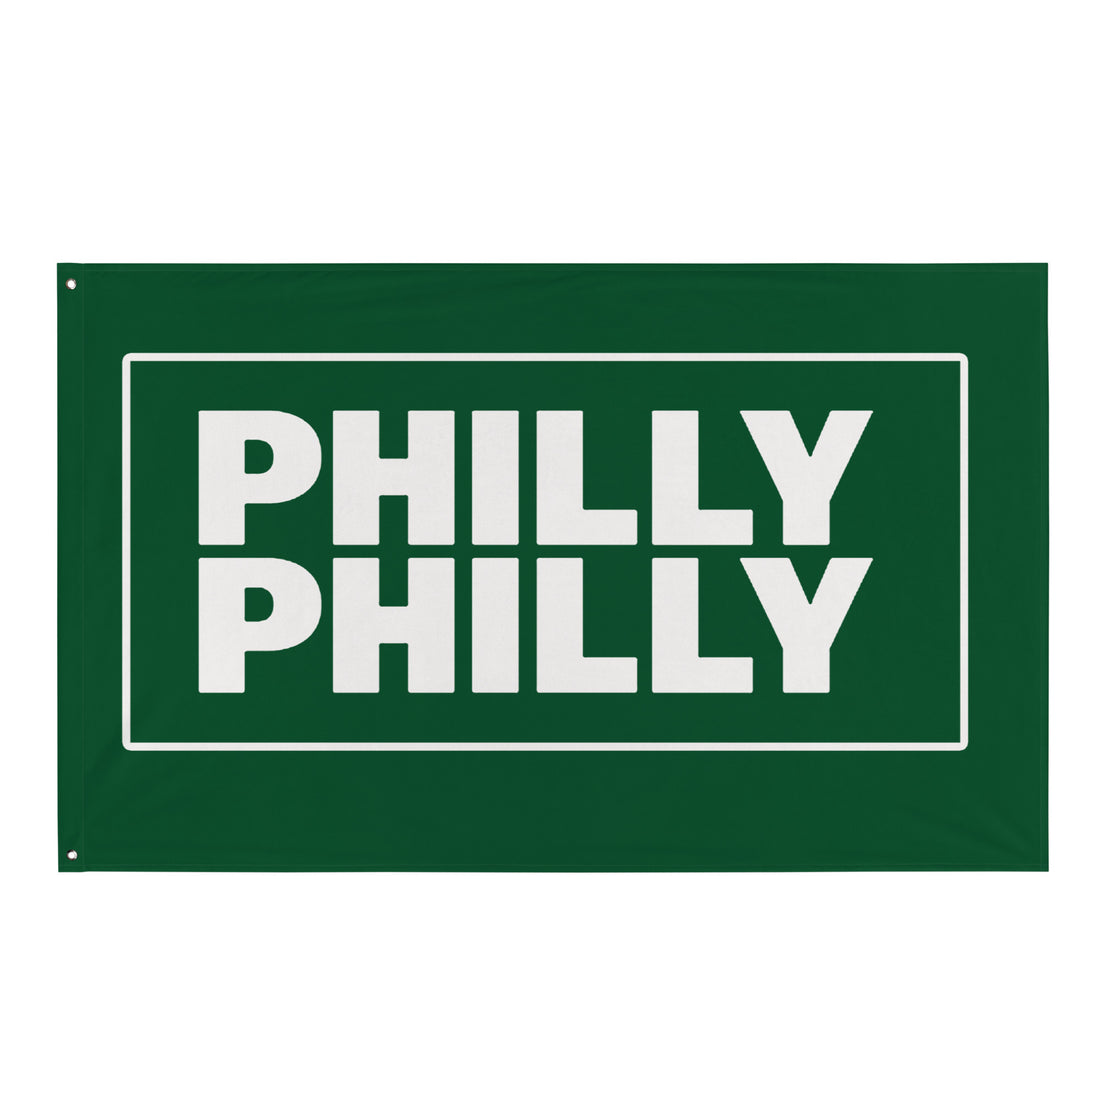 Philly Philly Flag